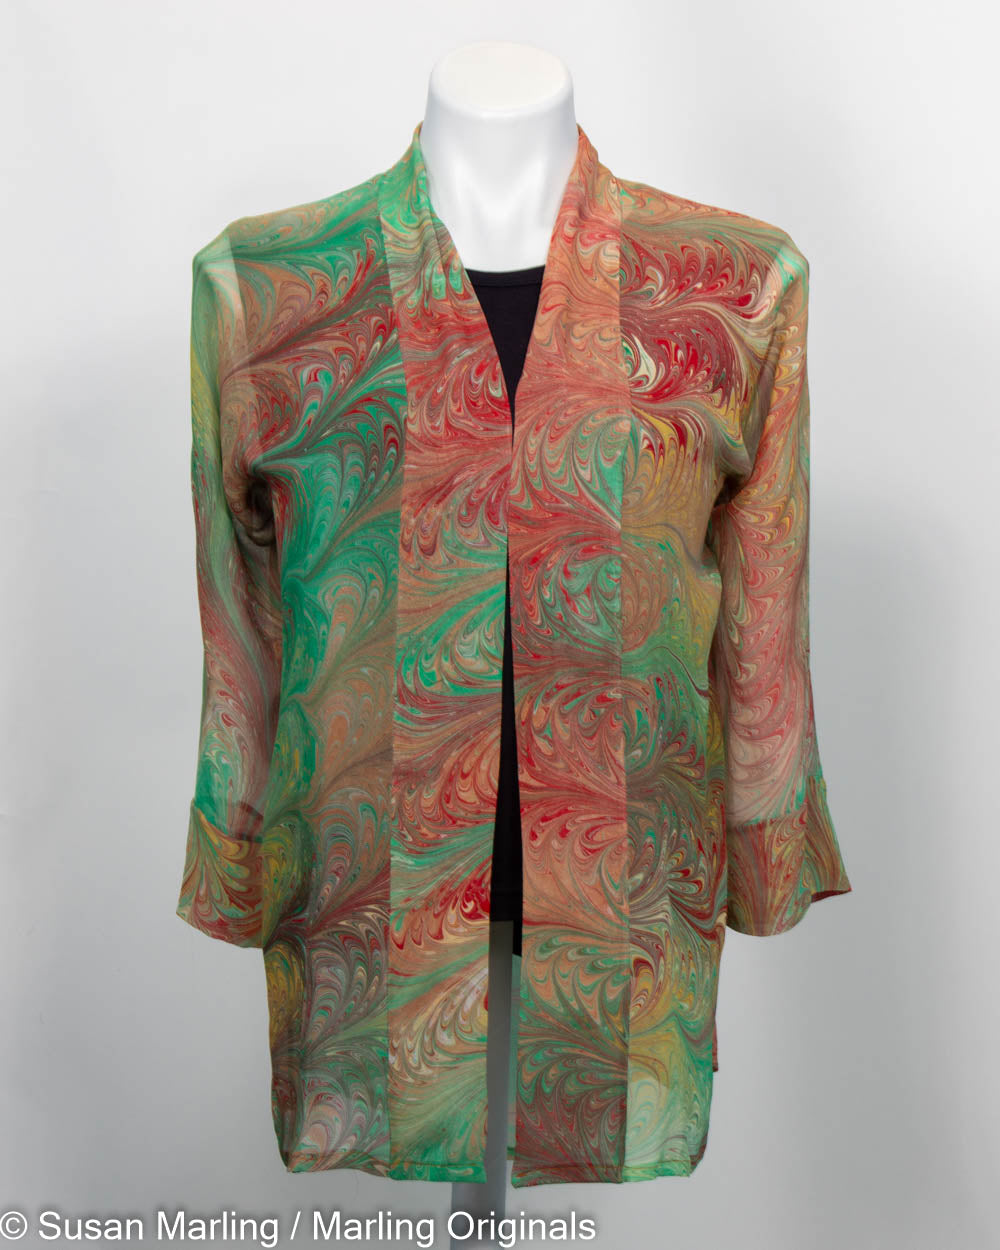 hand marbled silk chiffon kimono in spring green with sienna, red and gold colors